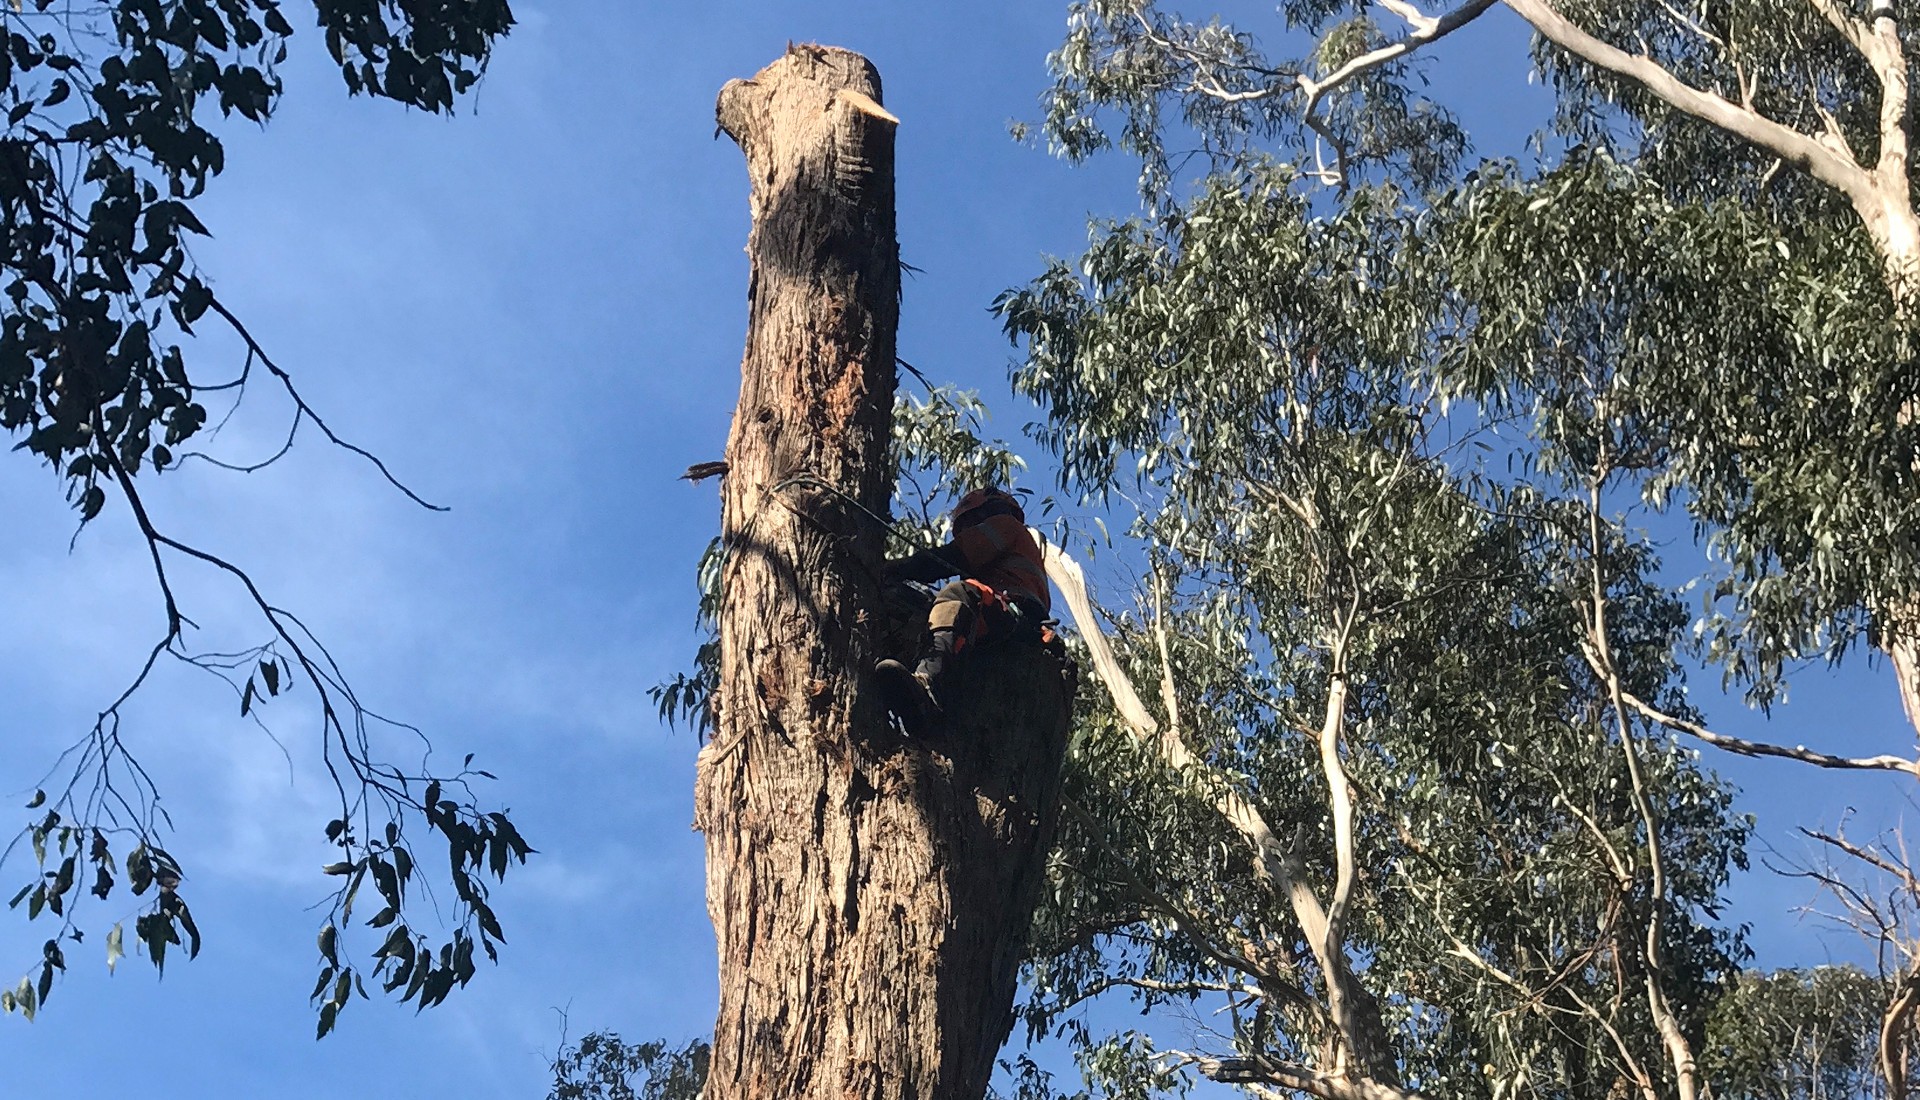 Arborist up in a tree and cutting it down gradually.